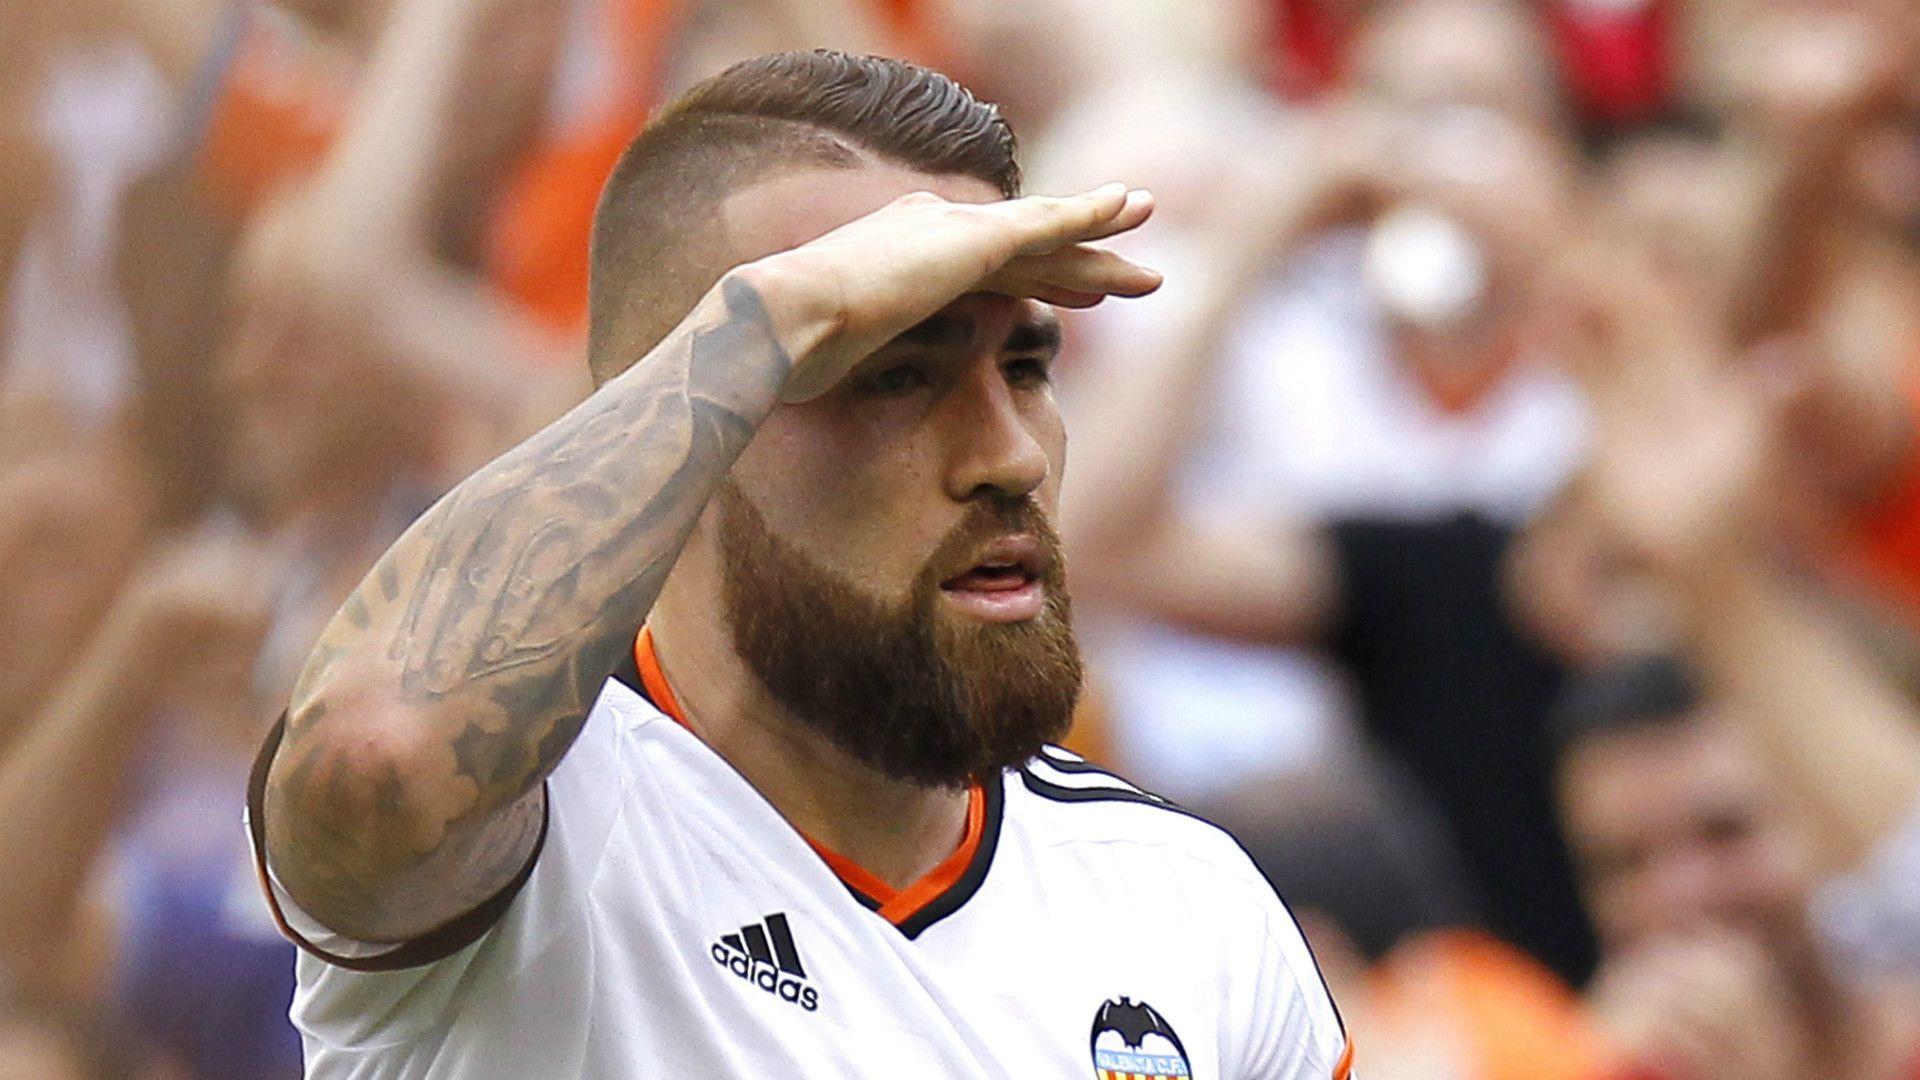 Which European countries and regions could Nicolás Otamendi pass?